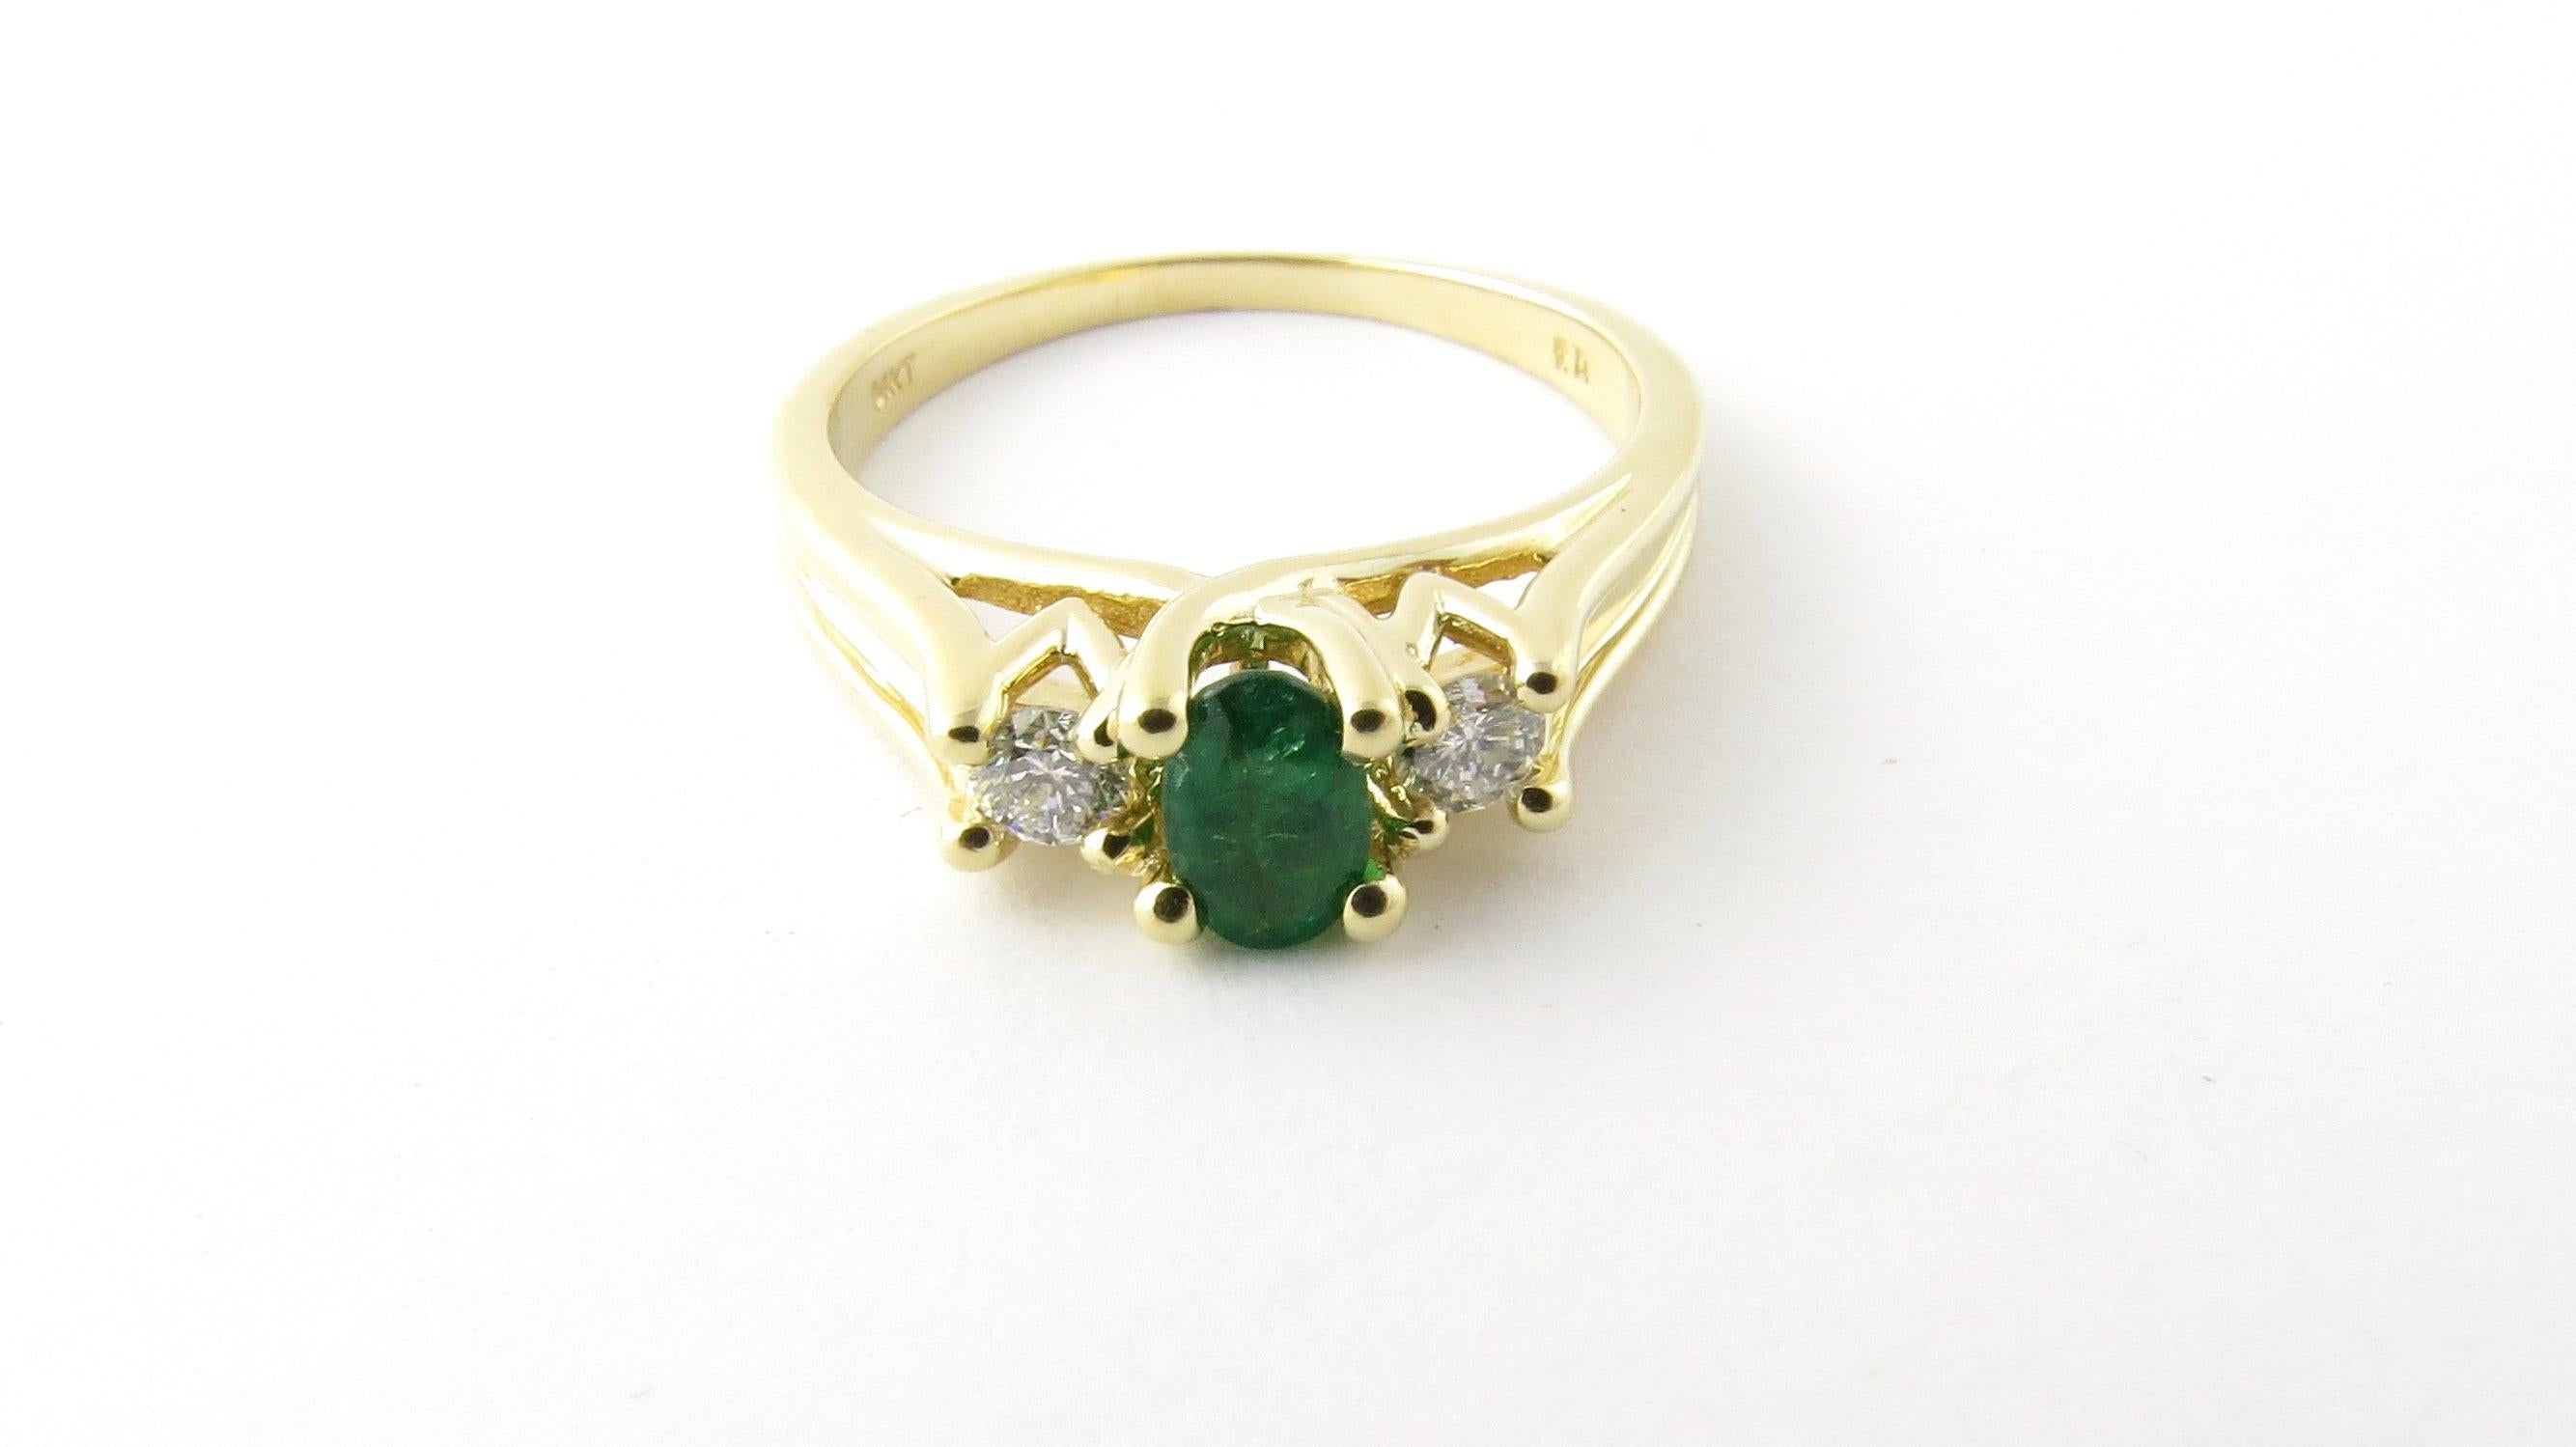 Vintage 14 Karat Yellow Gold Genuine Emerald and Diamond Ring Size 7.25. This lovely ring features one oval genuine emerald (6 mm x 4 mm) accented with two round brilliant cut diamonds set in classic 14K yellow gold. Shank measures 1.5